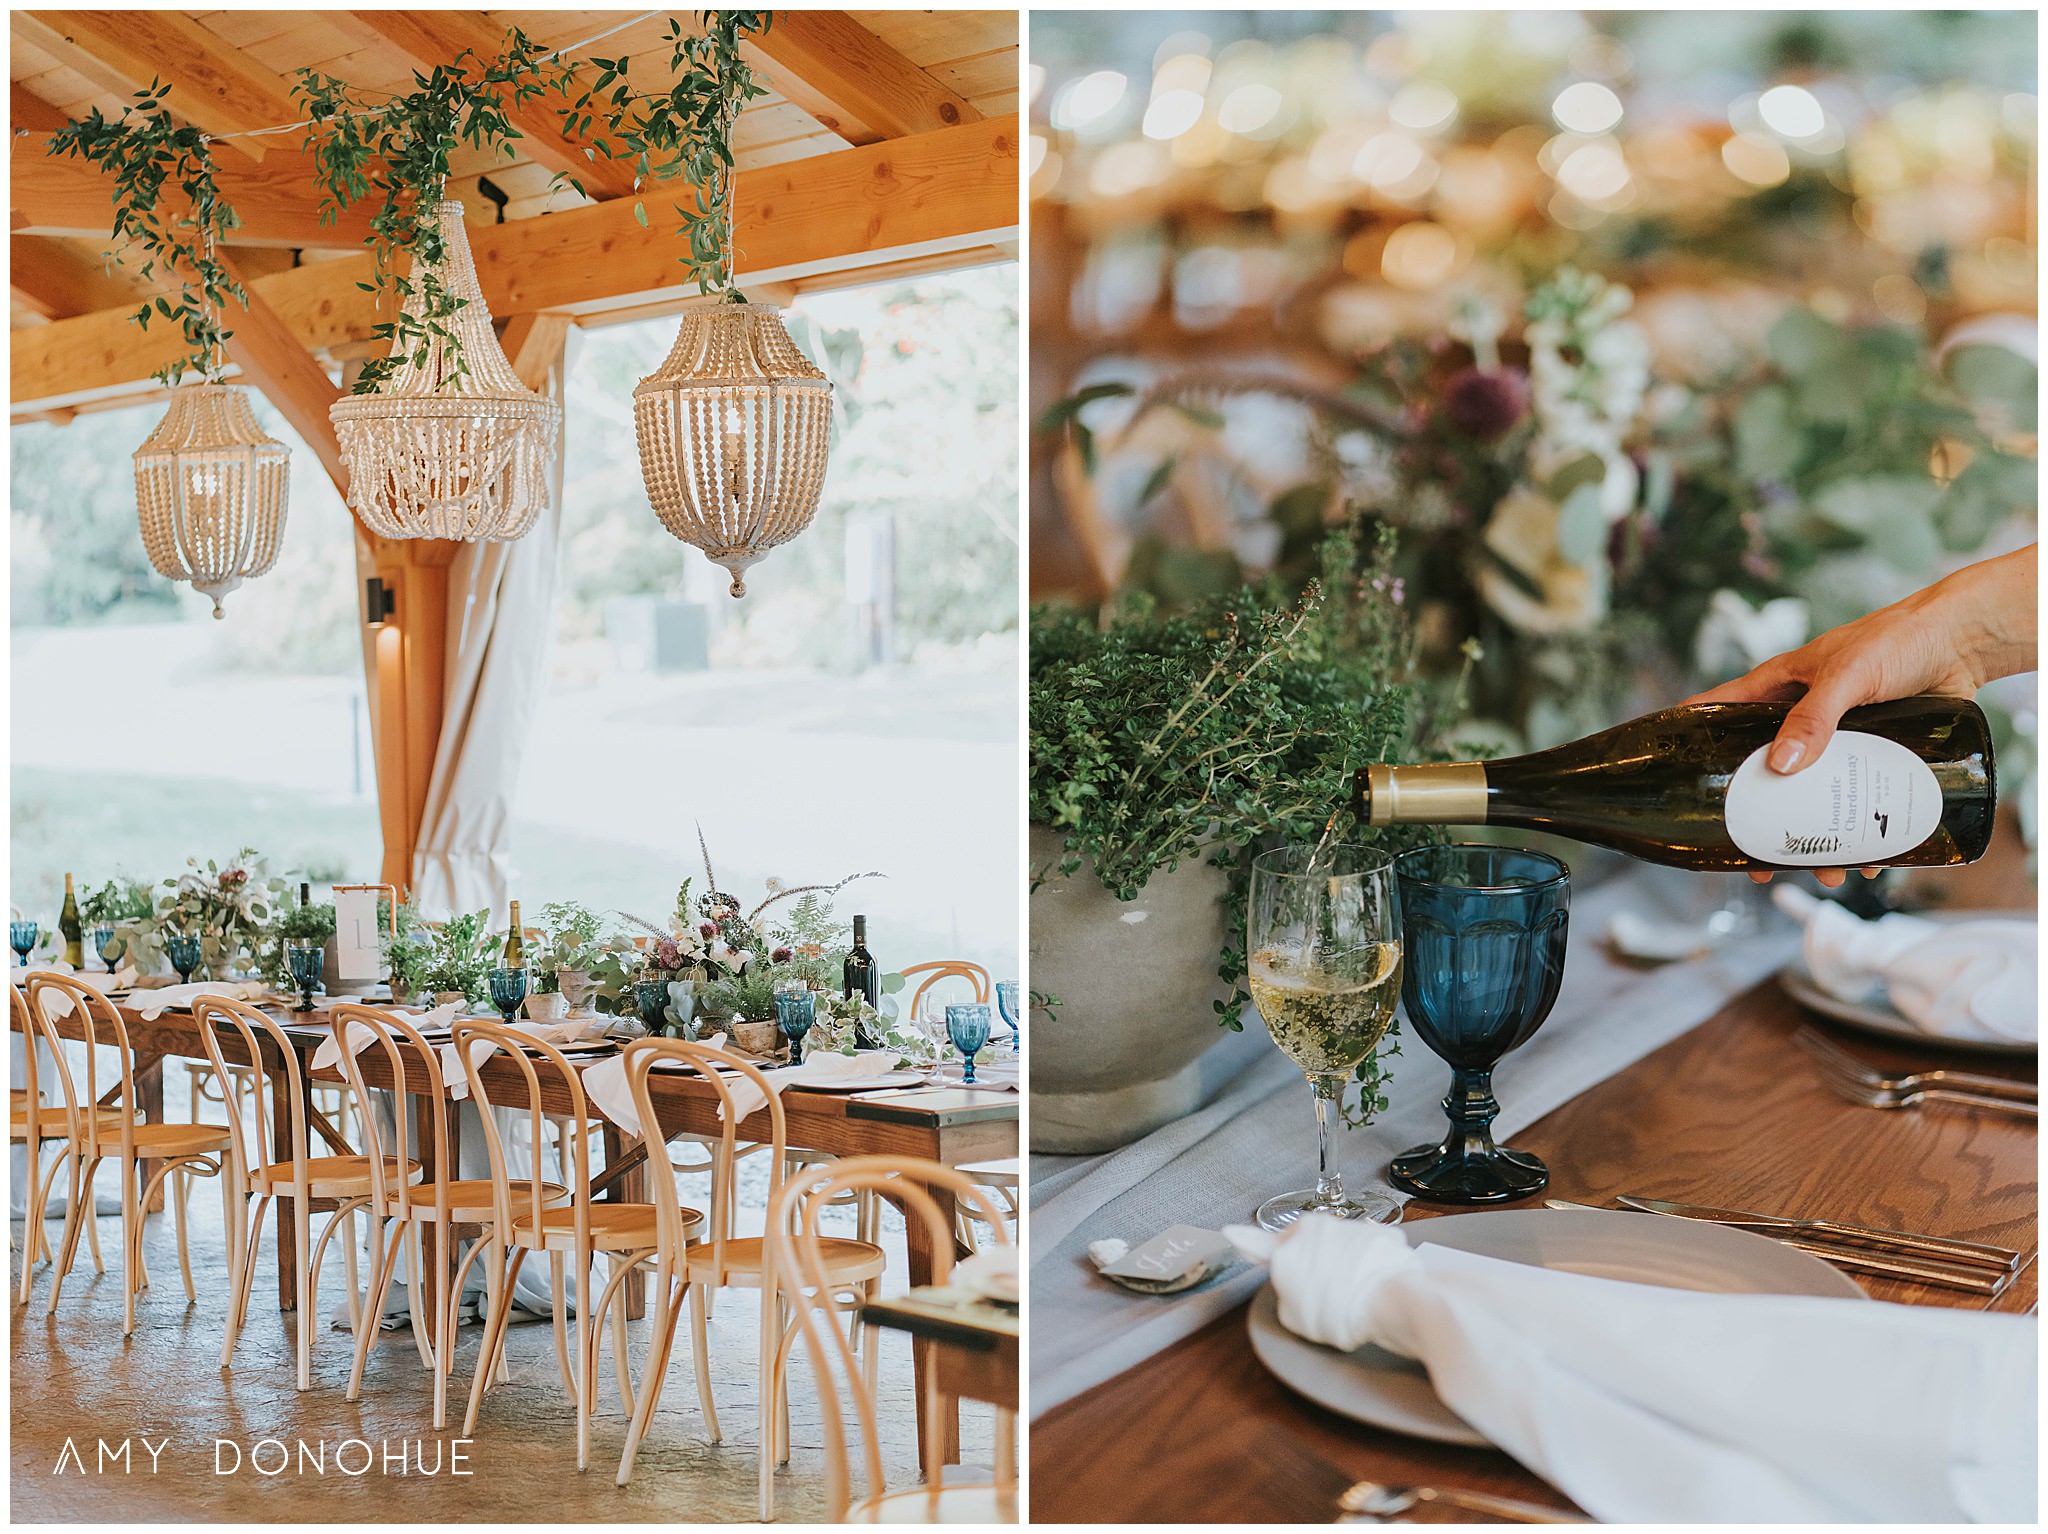 Wedding Reception | The Fells Estate | The Prism House Event Design & Wedding Planning | New Hampshire Wedding Photographer | © Amy Donohue Photography